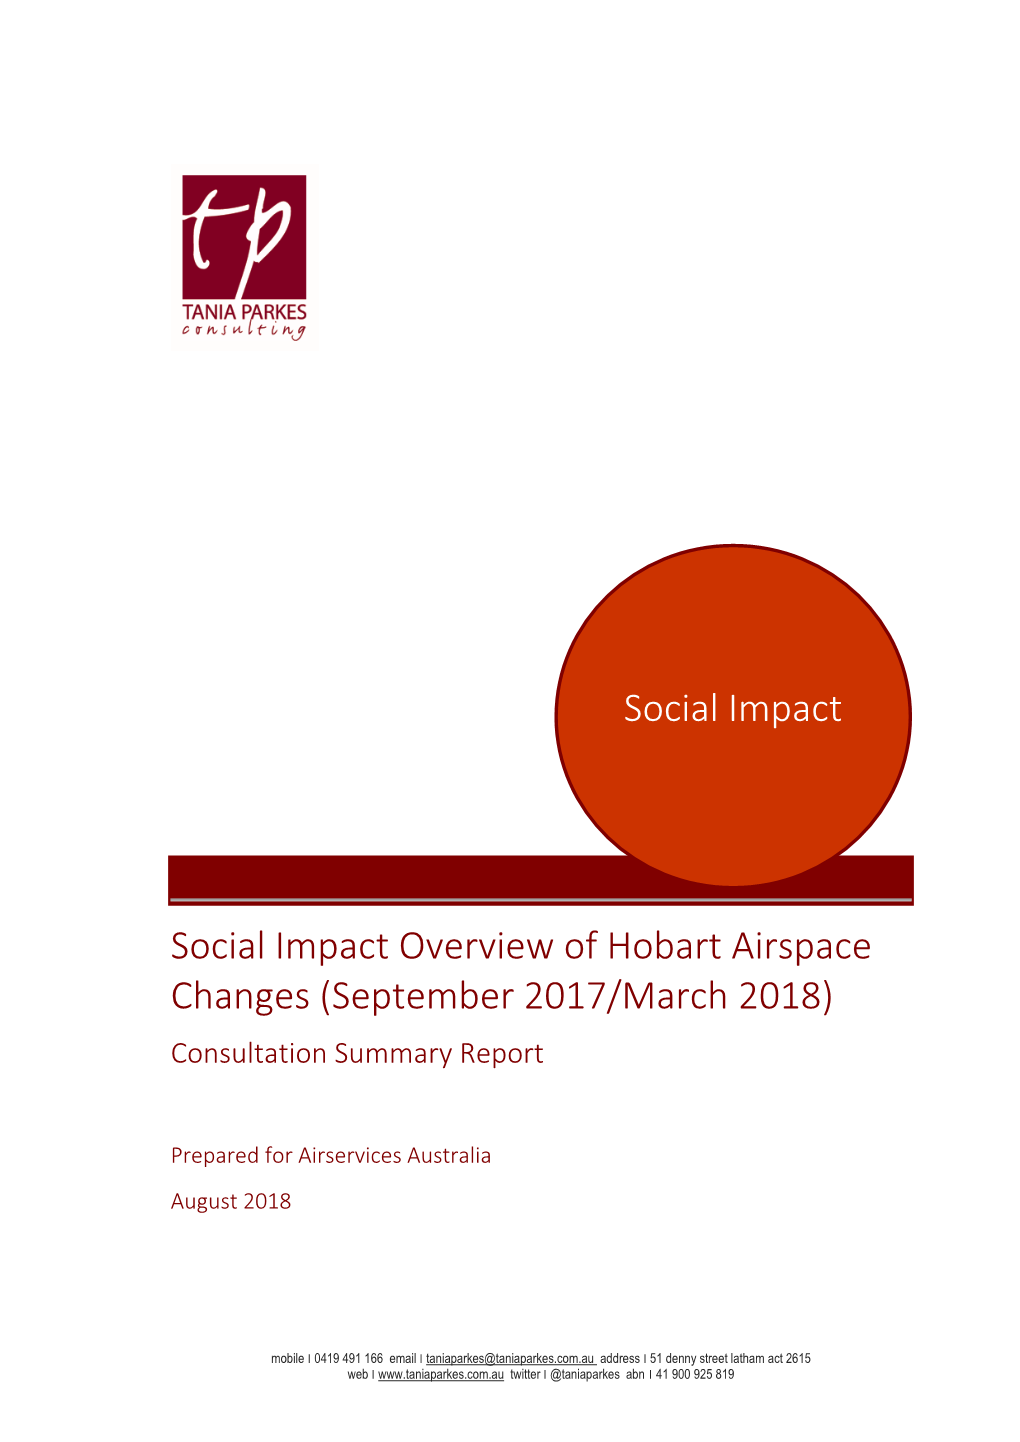 Social Impact Overview of Hobart Airspace Changes (September 2017/March 2018) Consultation Summary Report